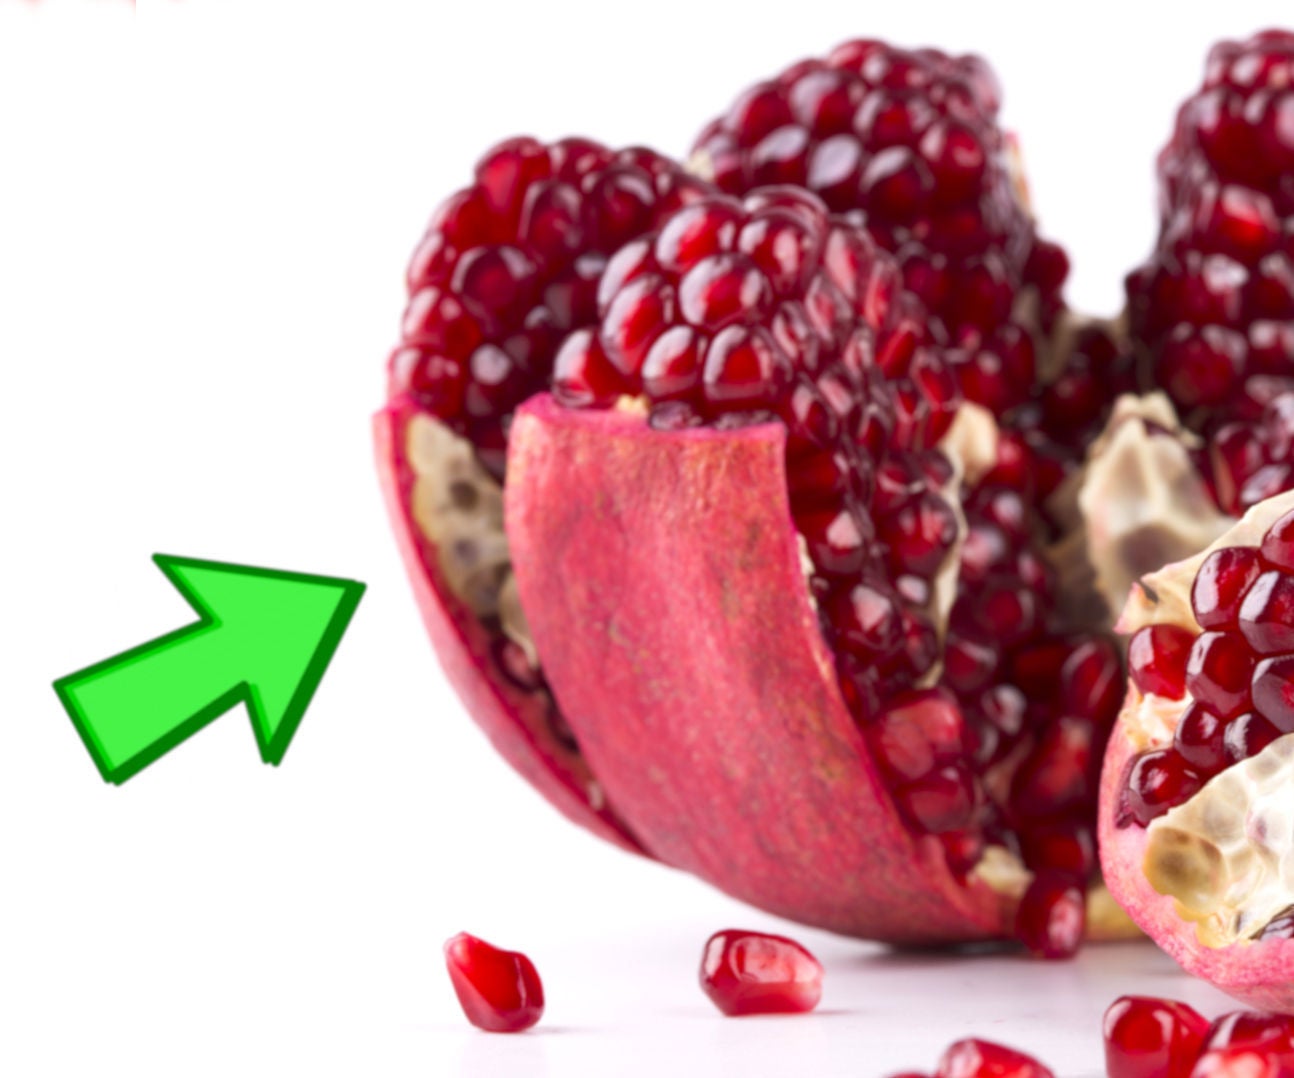 How to Cut or Open Pomegranate